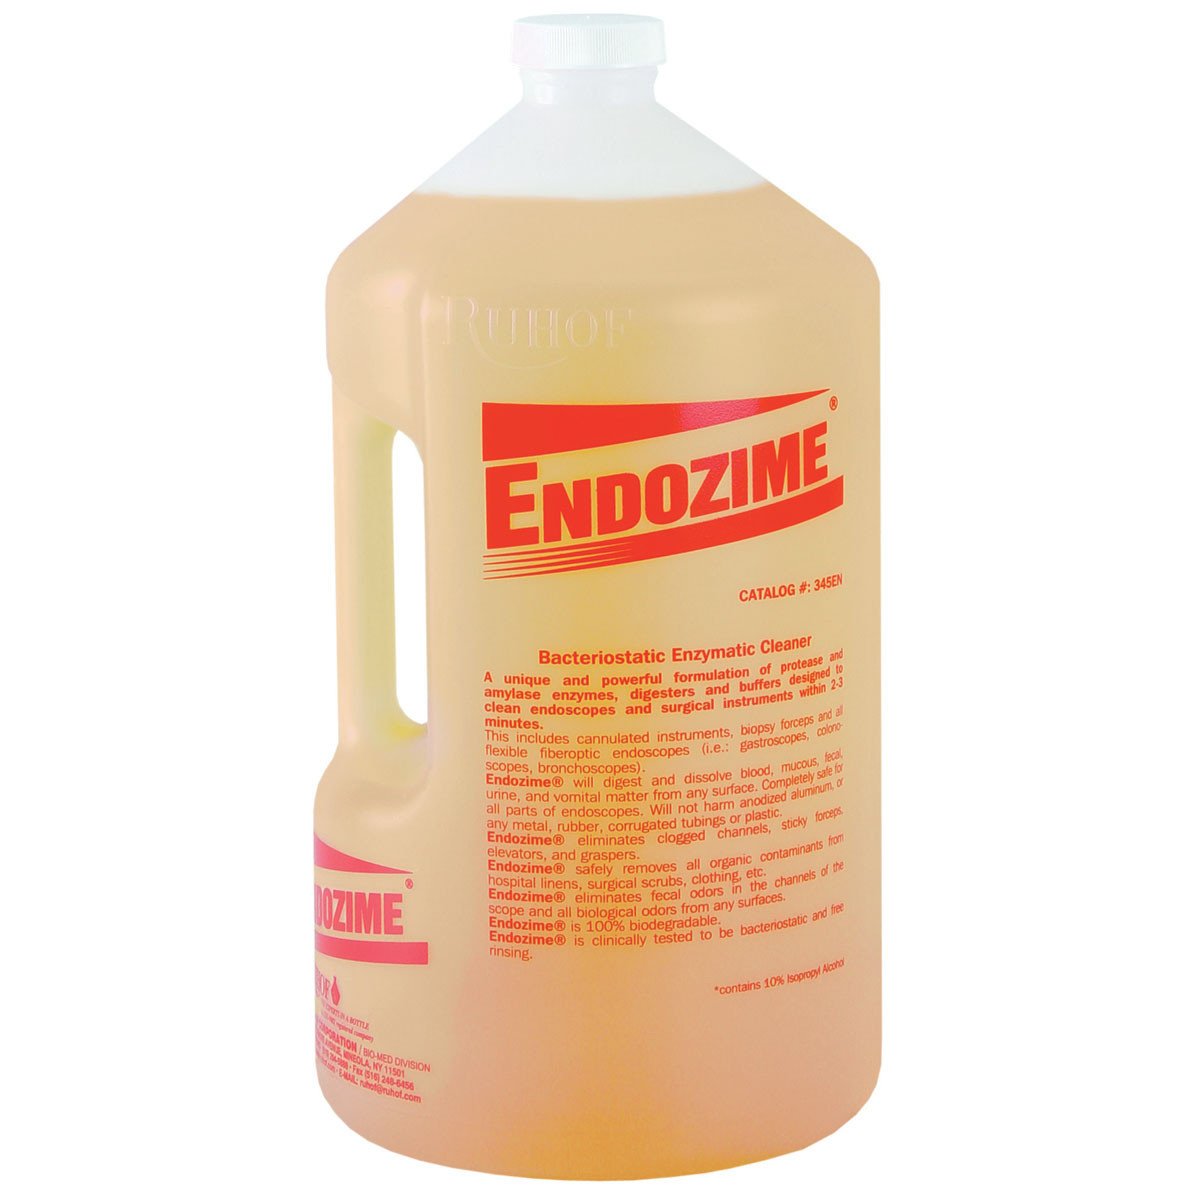 Ruhof Healthcare - Cleaning Solutions for Healthcare Facilities - Endozime®